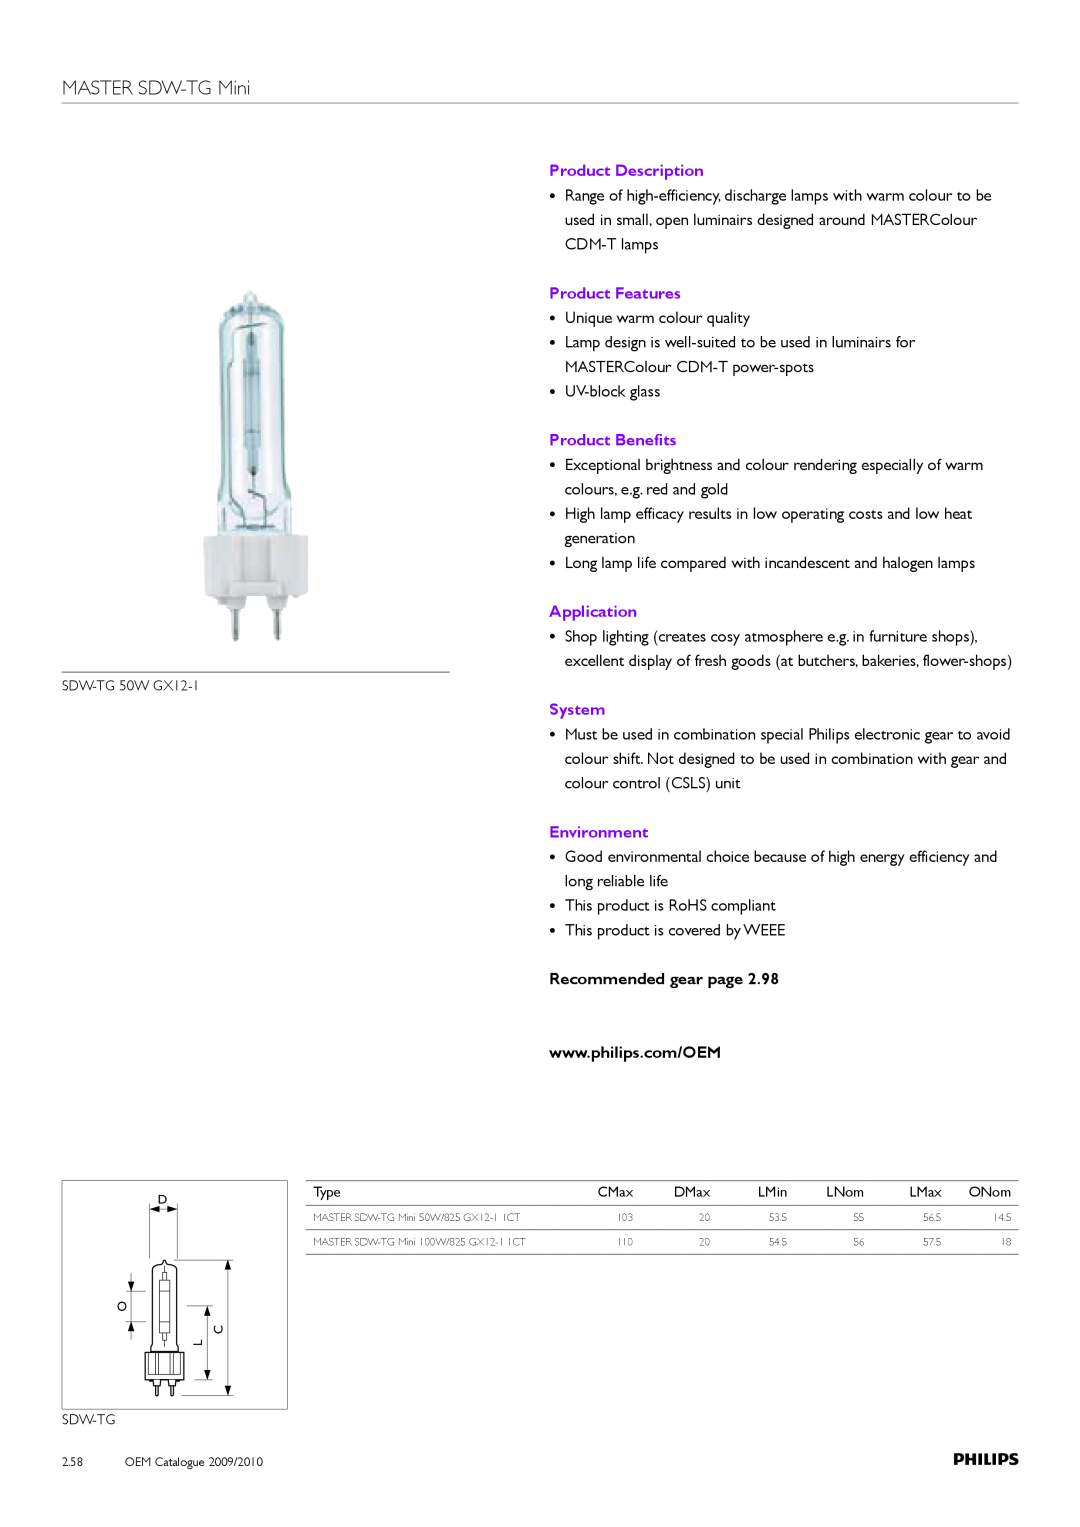 Philips Compact HID Lamp and Gear MASTER SDW-TGMini, Product Description, Product Features, Product Benefits, Application 